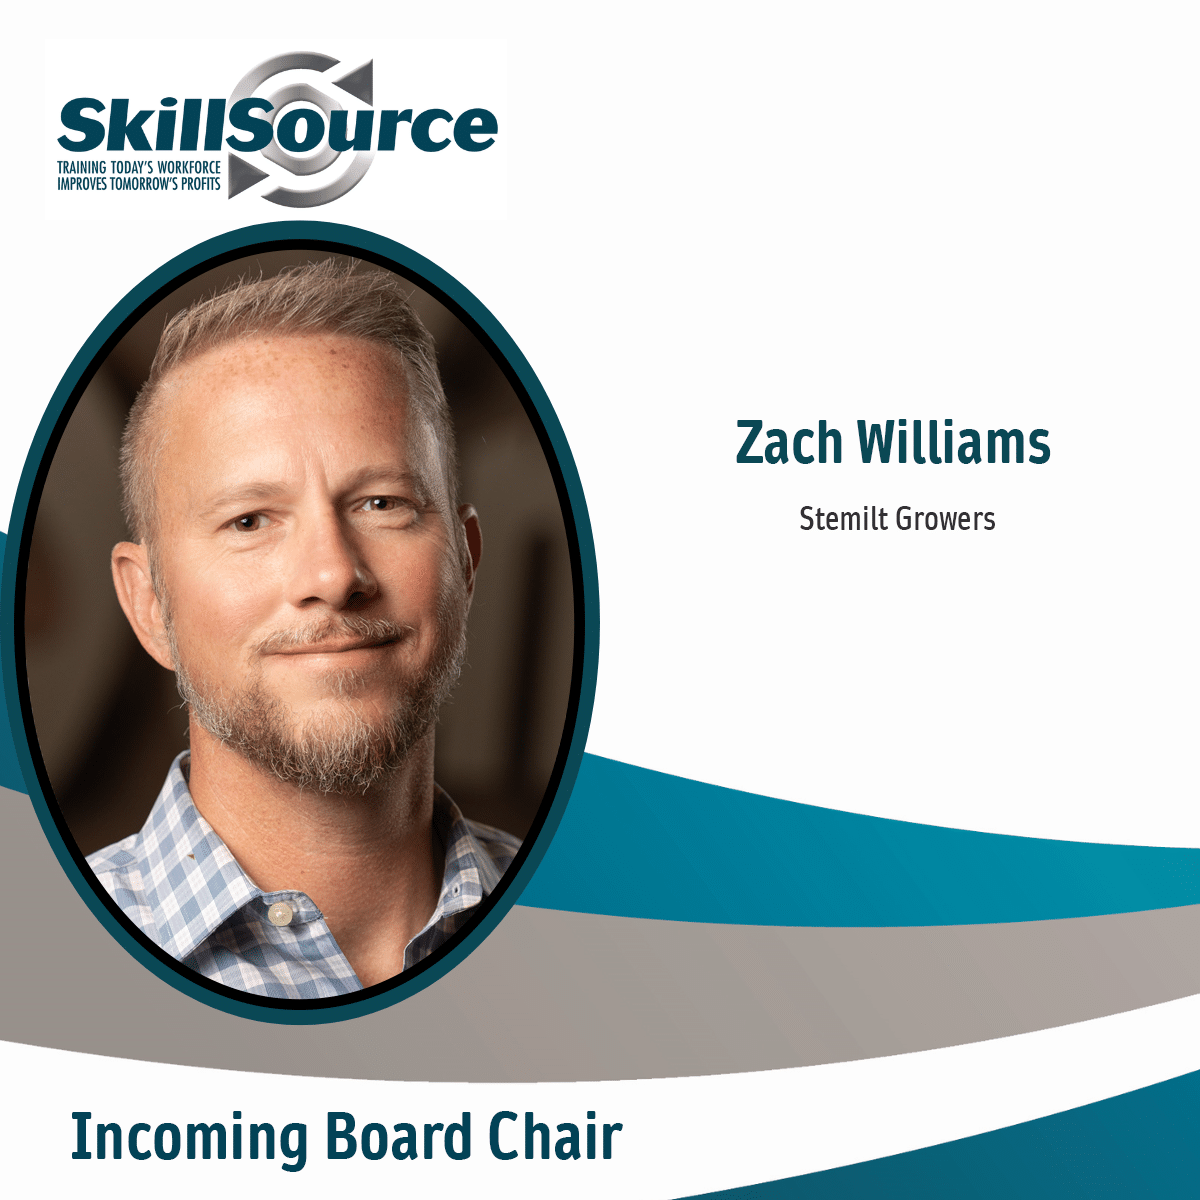 SkillSource Welcomes New Board Chair, Zach Williams